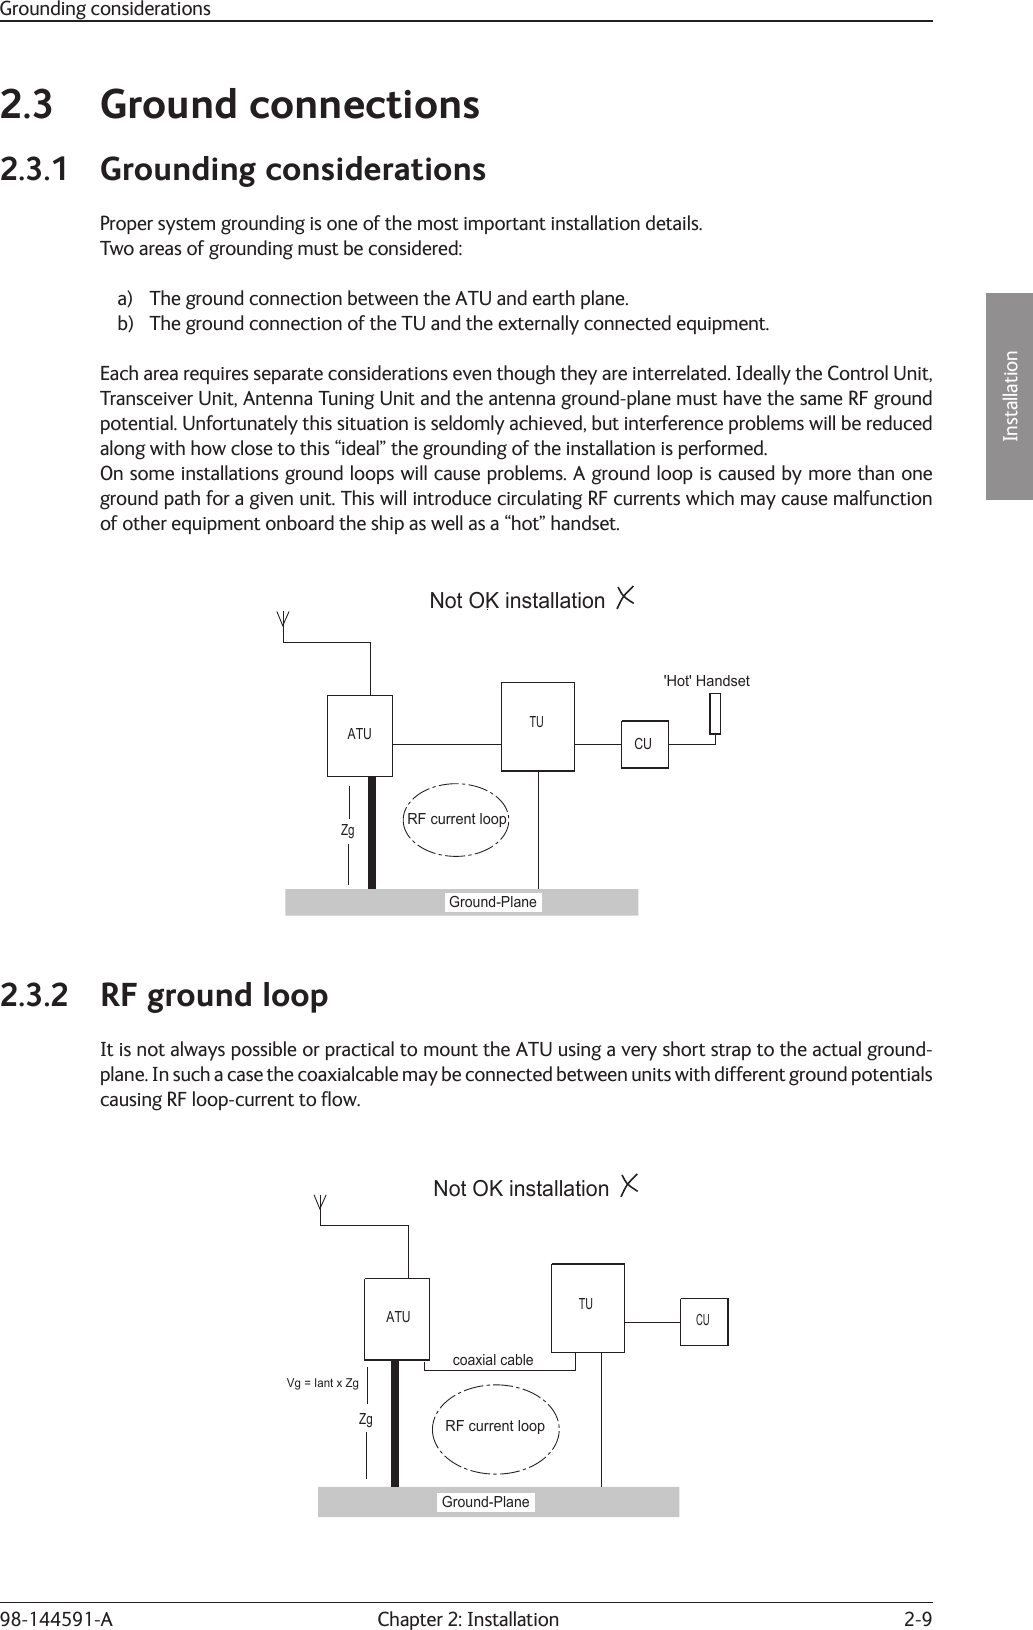 2-9Installation Chapter 2: Installation98-144591-AGrounding considerations2.3 Ground connections2.3.1 Grounding considerationsProper system grounding is one of the most important installation details.Two areas of grounding must be considered:  a)  The ground connection between the ATU and earth plane.  b)  The ground connection of the TU and the externally connected equipment.Each area requires separate considerations even though they are interrelated. Ideally the Control Unit, Transceiver Unit, Antenna Tuning Unit and the antenna ground-plane must have the same RF ground potential. Unfortunately this situation is seldomly achieved, but interference problems will be reduced along with how close to this “ideal” the grounding of the installation is performed.On some installations ground loops will cause problems. A ground loop is caused by more than one ground path for a given unit. This will introduce circulating RF currents which may cause malfunction of other equipment onboard the ship as well as a “hot” handset.ATUTUCU&apos;Hot&apos; HandsetRF current loopGround-PlaneNot OK installationZg2.3.2  RF ground loopIt is not always possible or practical to mount the ATU using a very short strap to the actual ground-plane. In such a case the coaxialcable may be connected between units with different ground potentials causing RF loop-current to ﬂ ow.ATUTUCUNot OK installationcoaxial cableRF current loopGround-PlaneZgVg = Iant x Zg